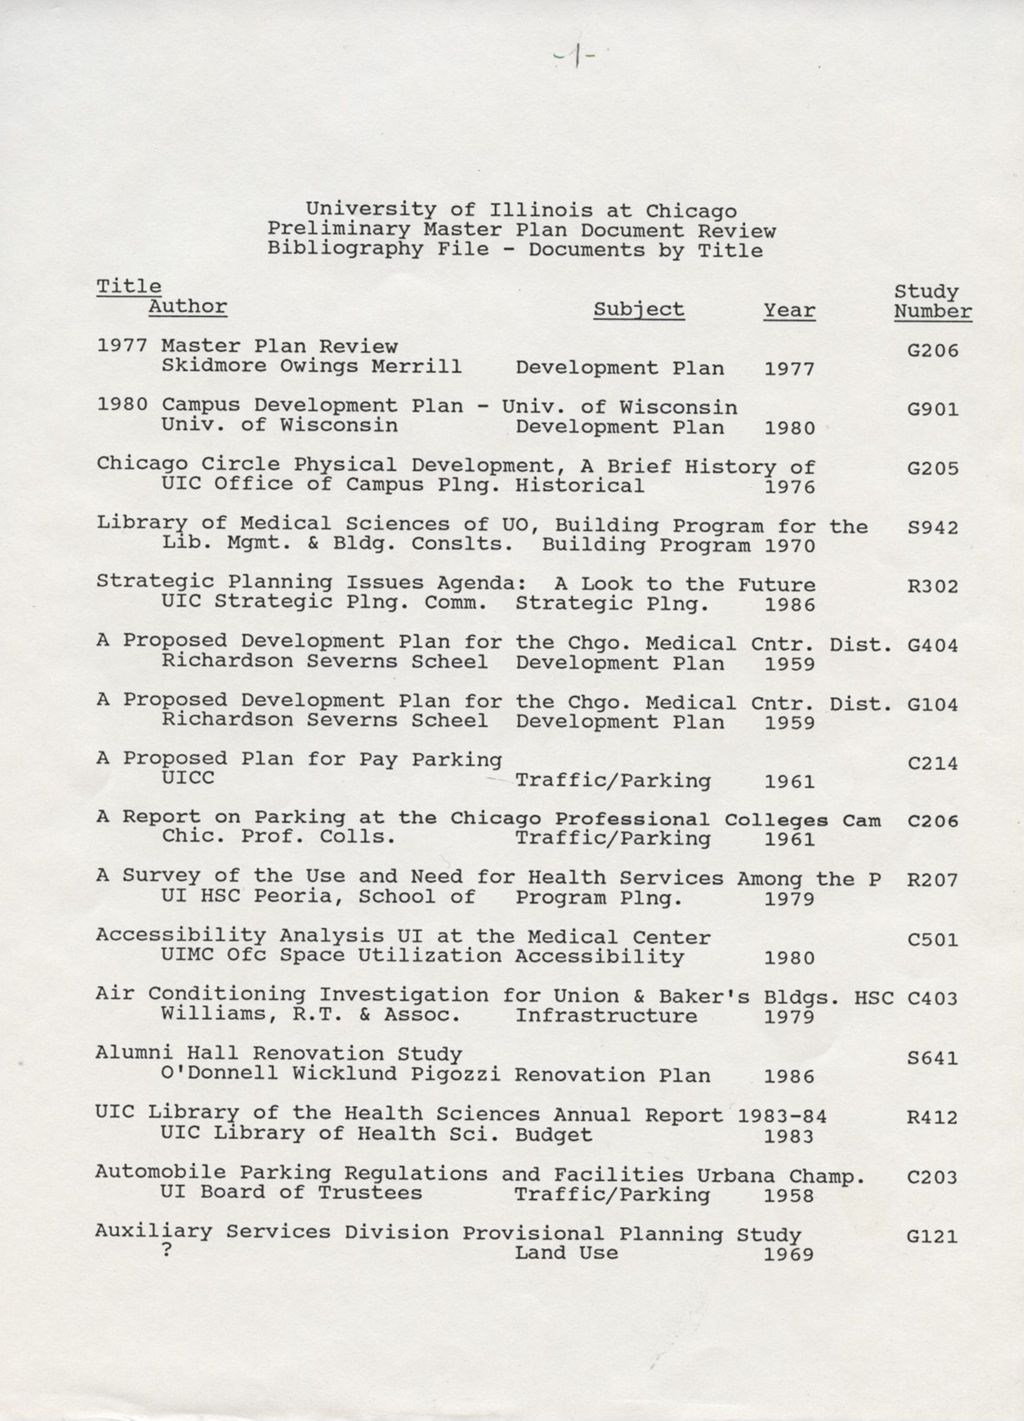 Preliminary Master Plan Document Review Bibliography file, University of Illinois at Chicago